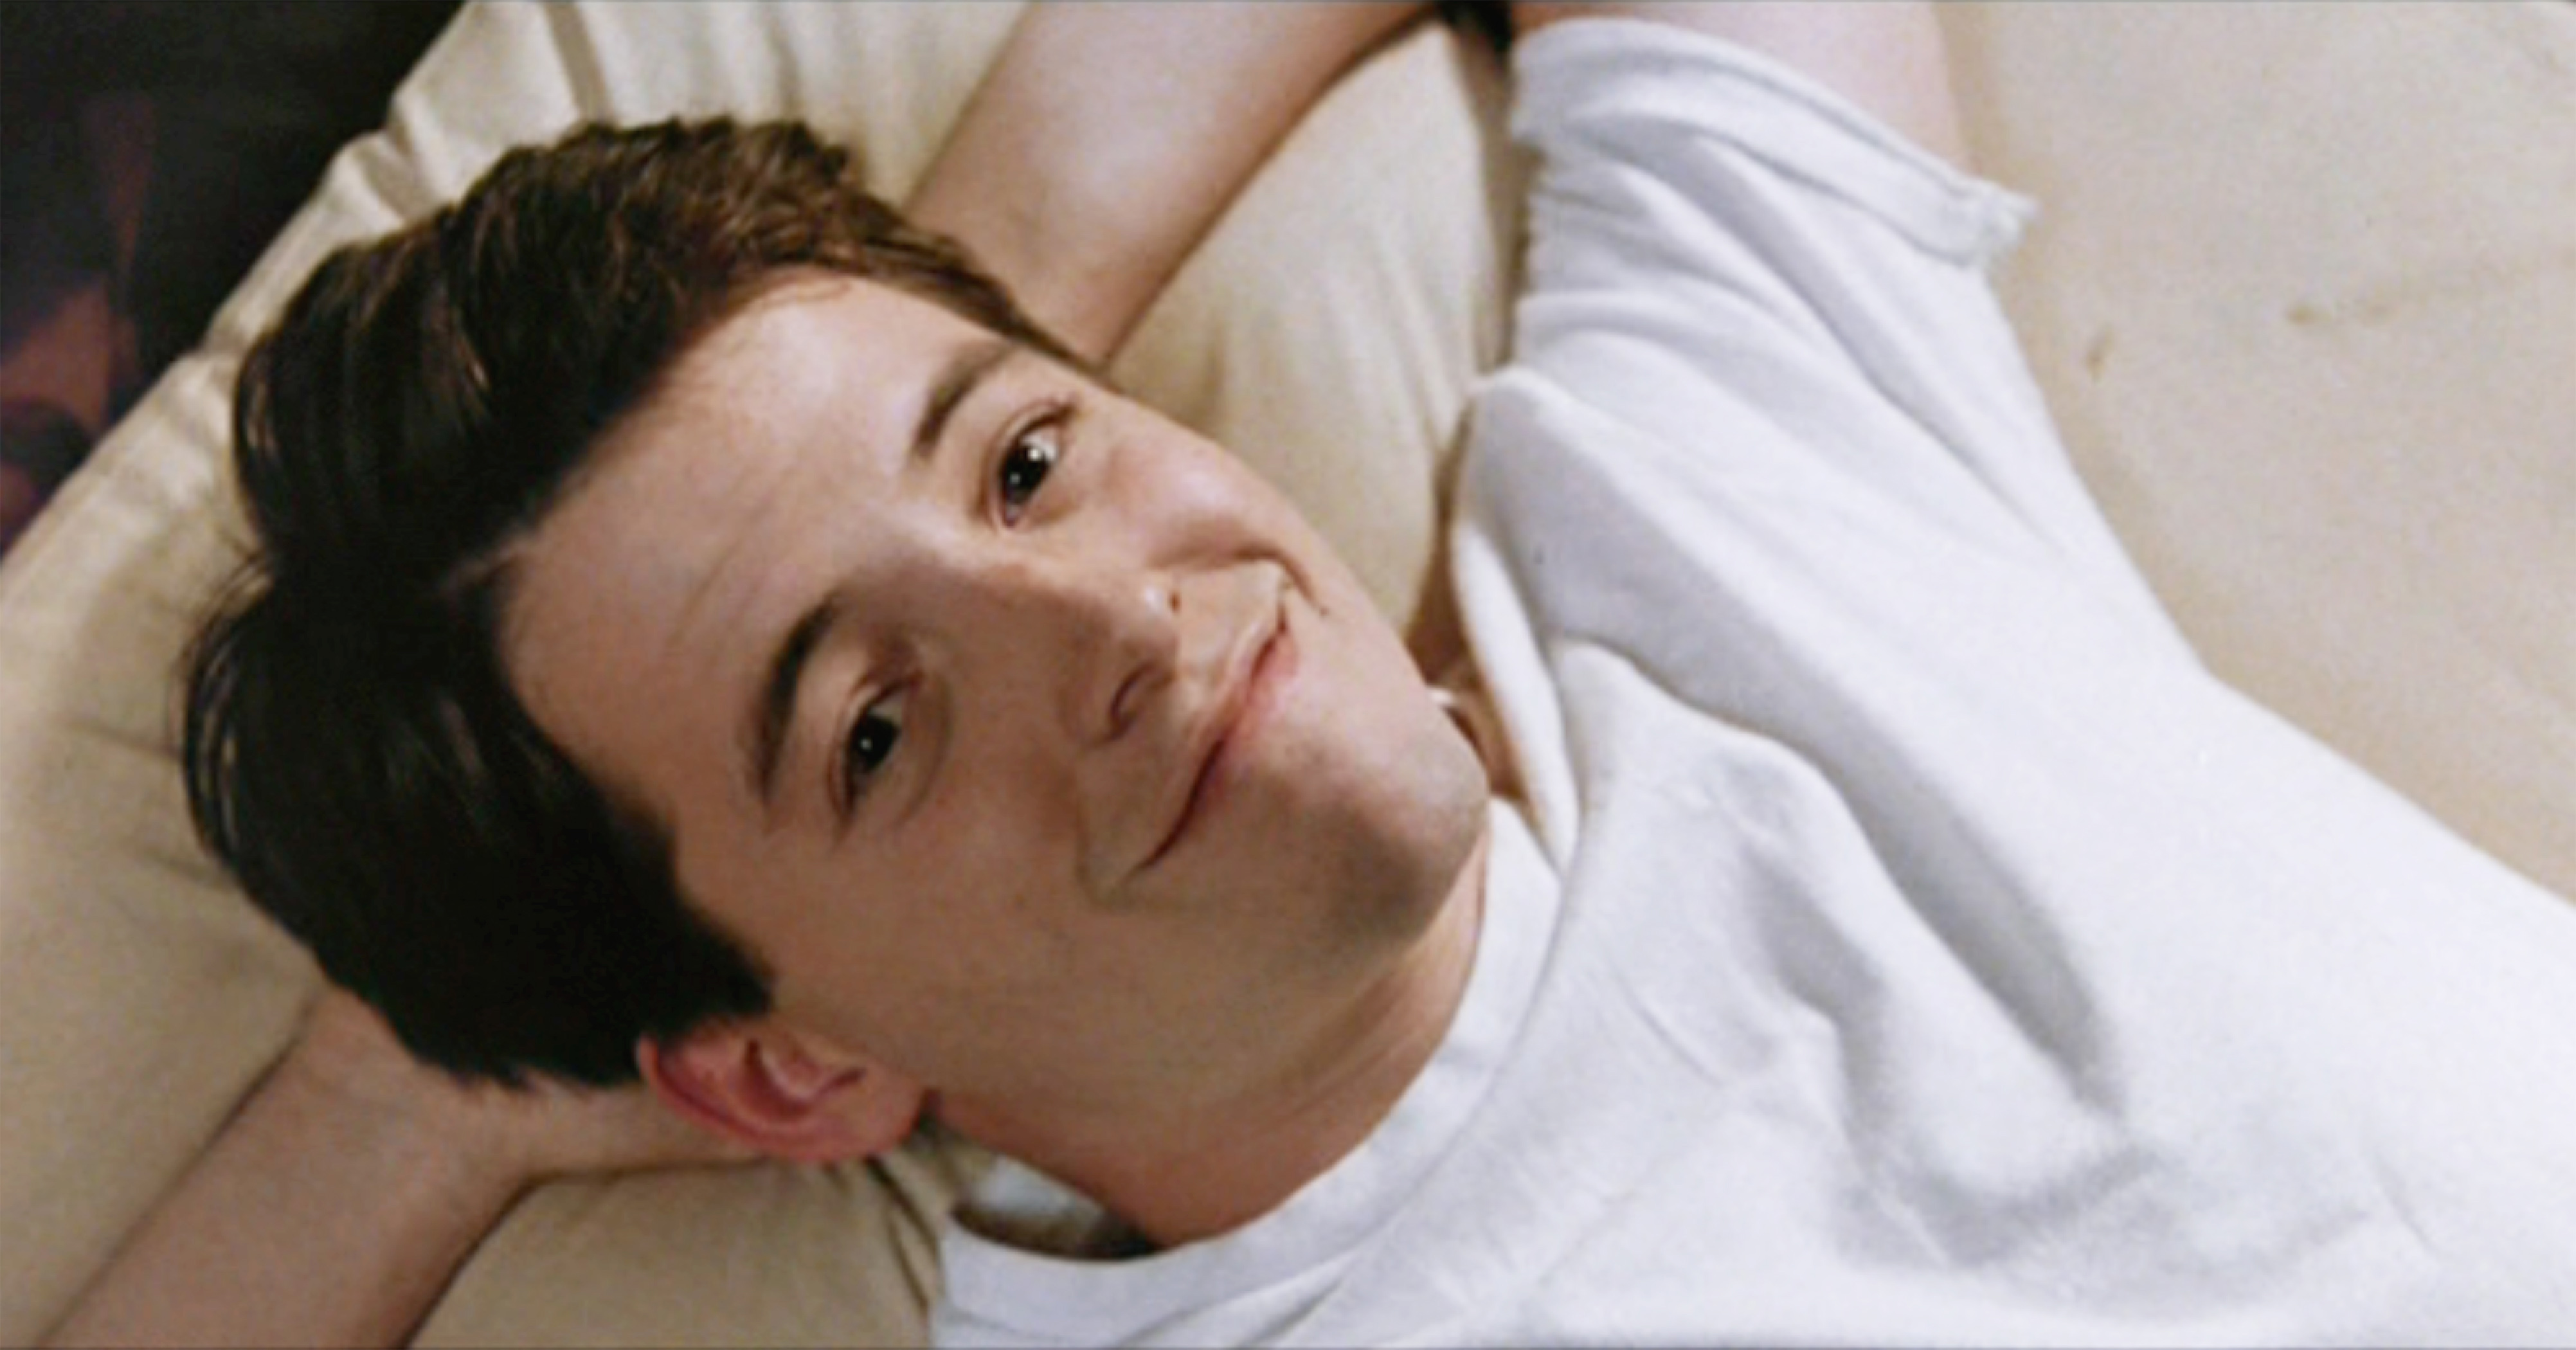 Style Tips You Can Learn From Ferris Bueller's Day Off